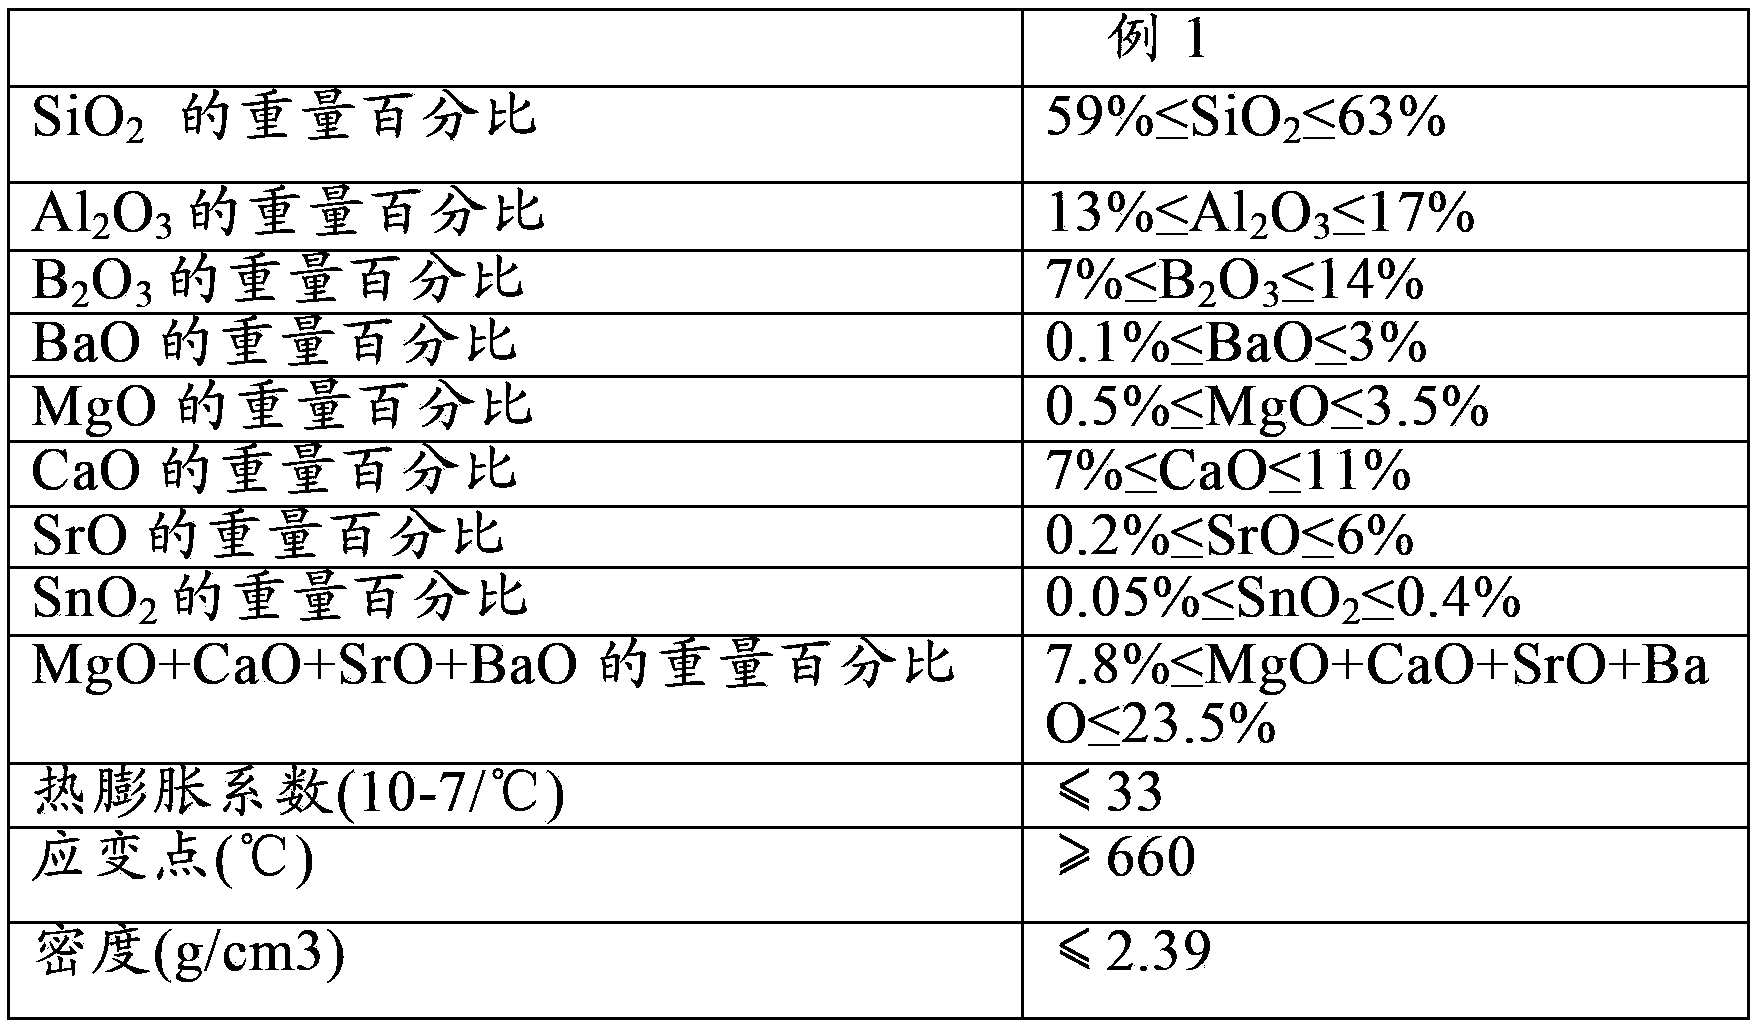 Composition of environmental glass used for TFT-LCDs